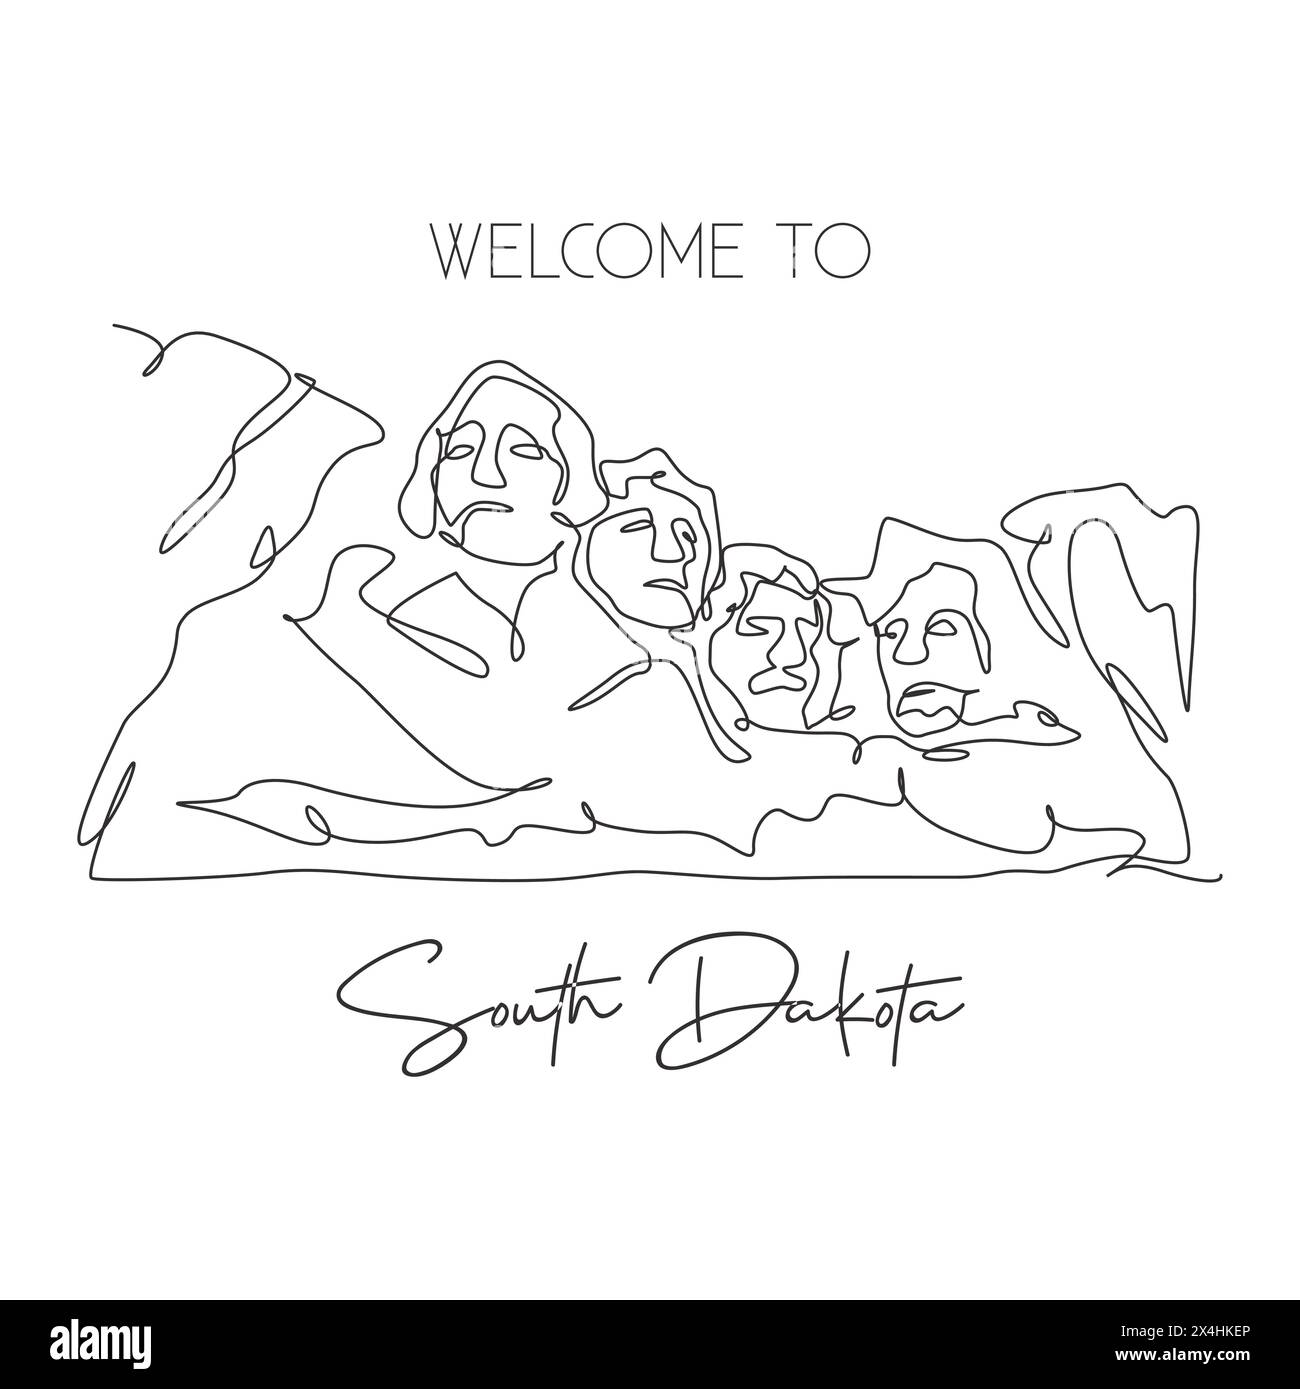 Single continuous line drawing Mount Rushmore National Memorial landmark. Famous place in South Dakota, USA. Travel tour home wall decor poster print. Stock Vector